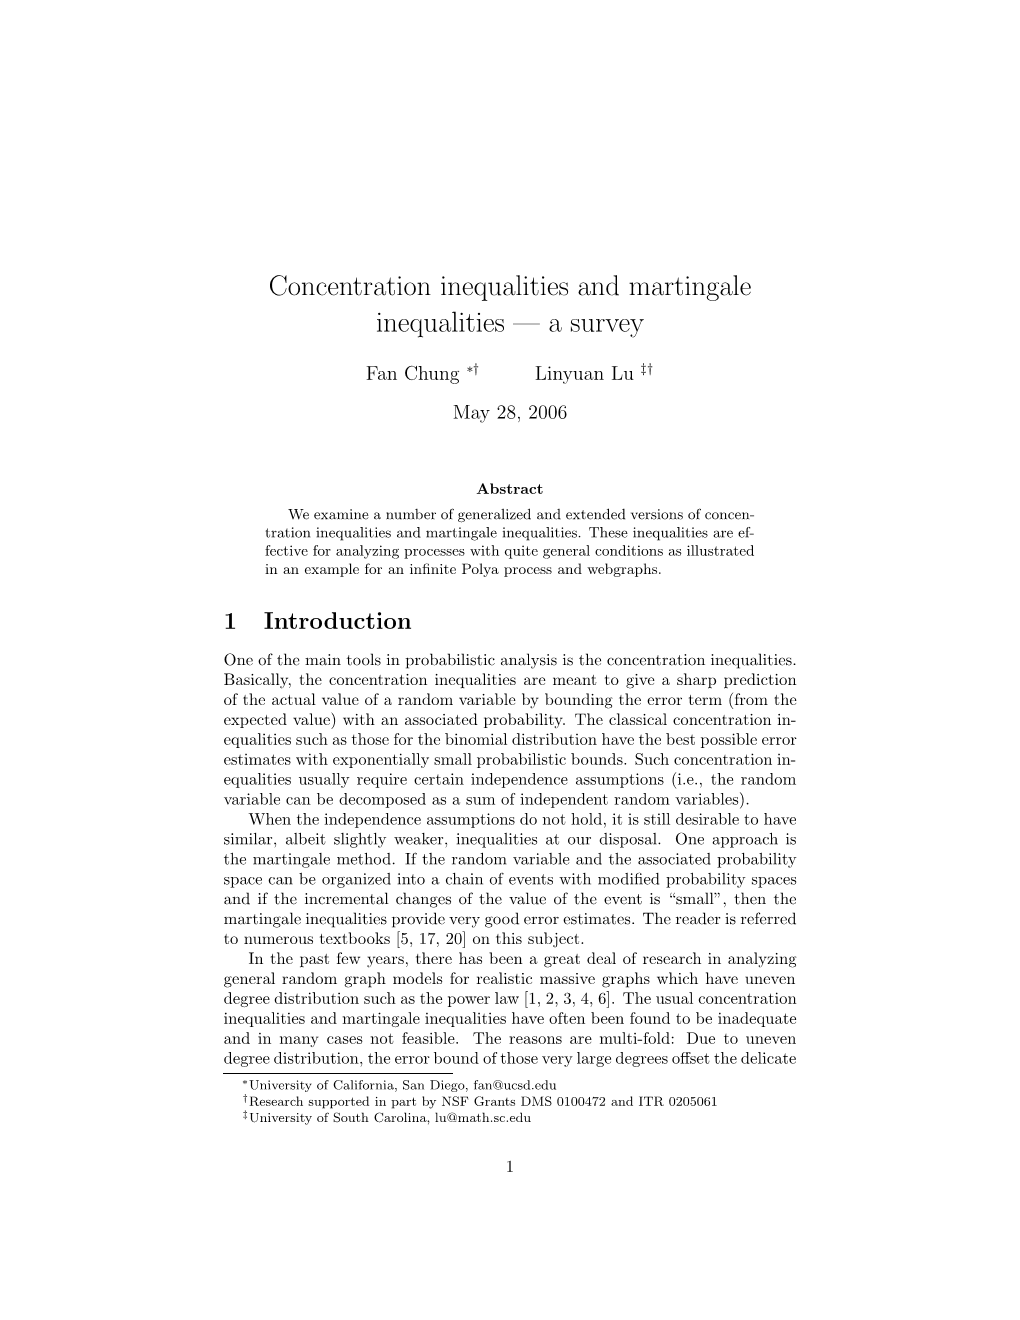 Concentration Inequalities and Martingale Inequalities — a Survey